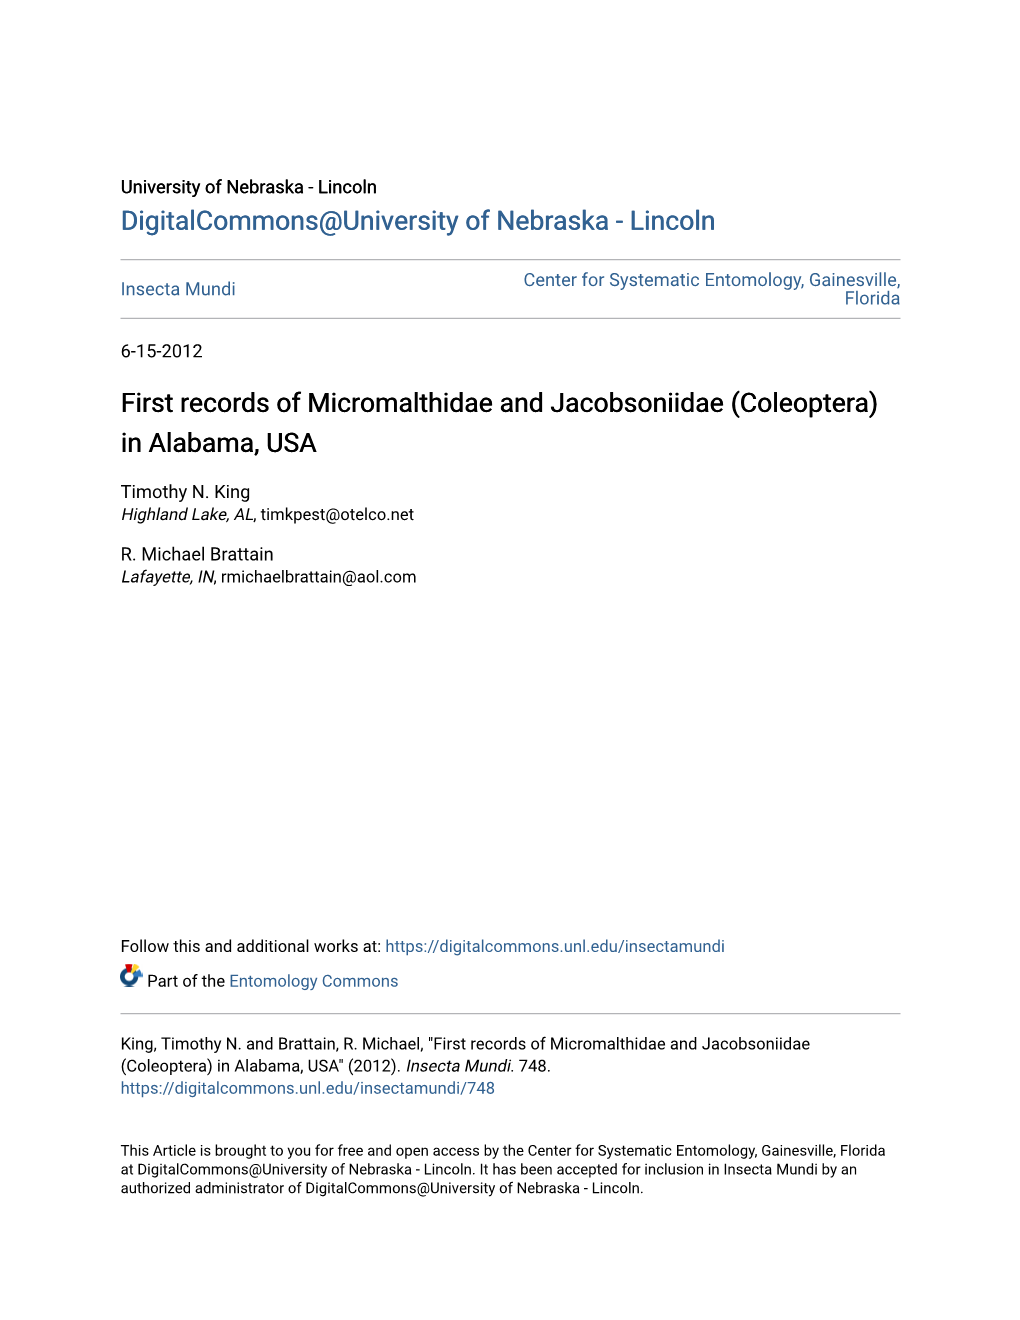 First Records of Micromalthidae and Jacobsoniidae (Coleoptera) in Alabama, USA